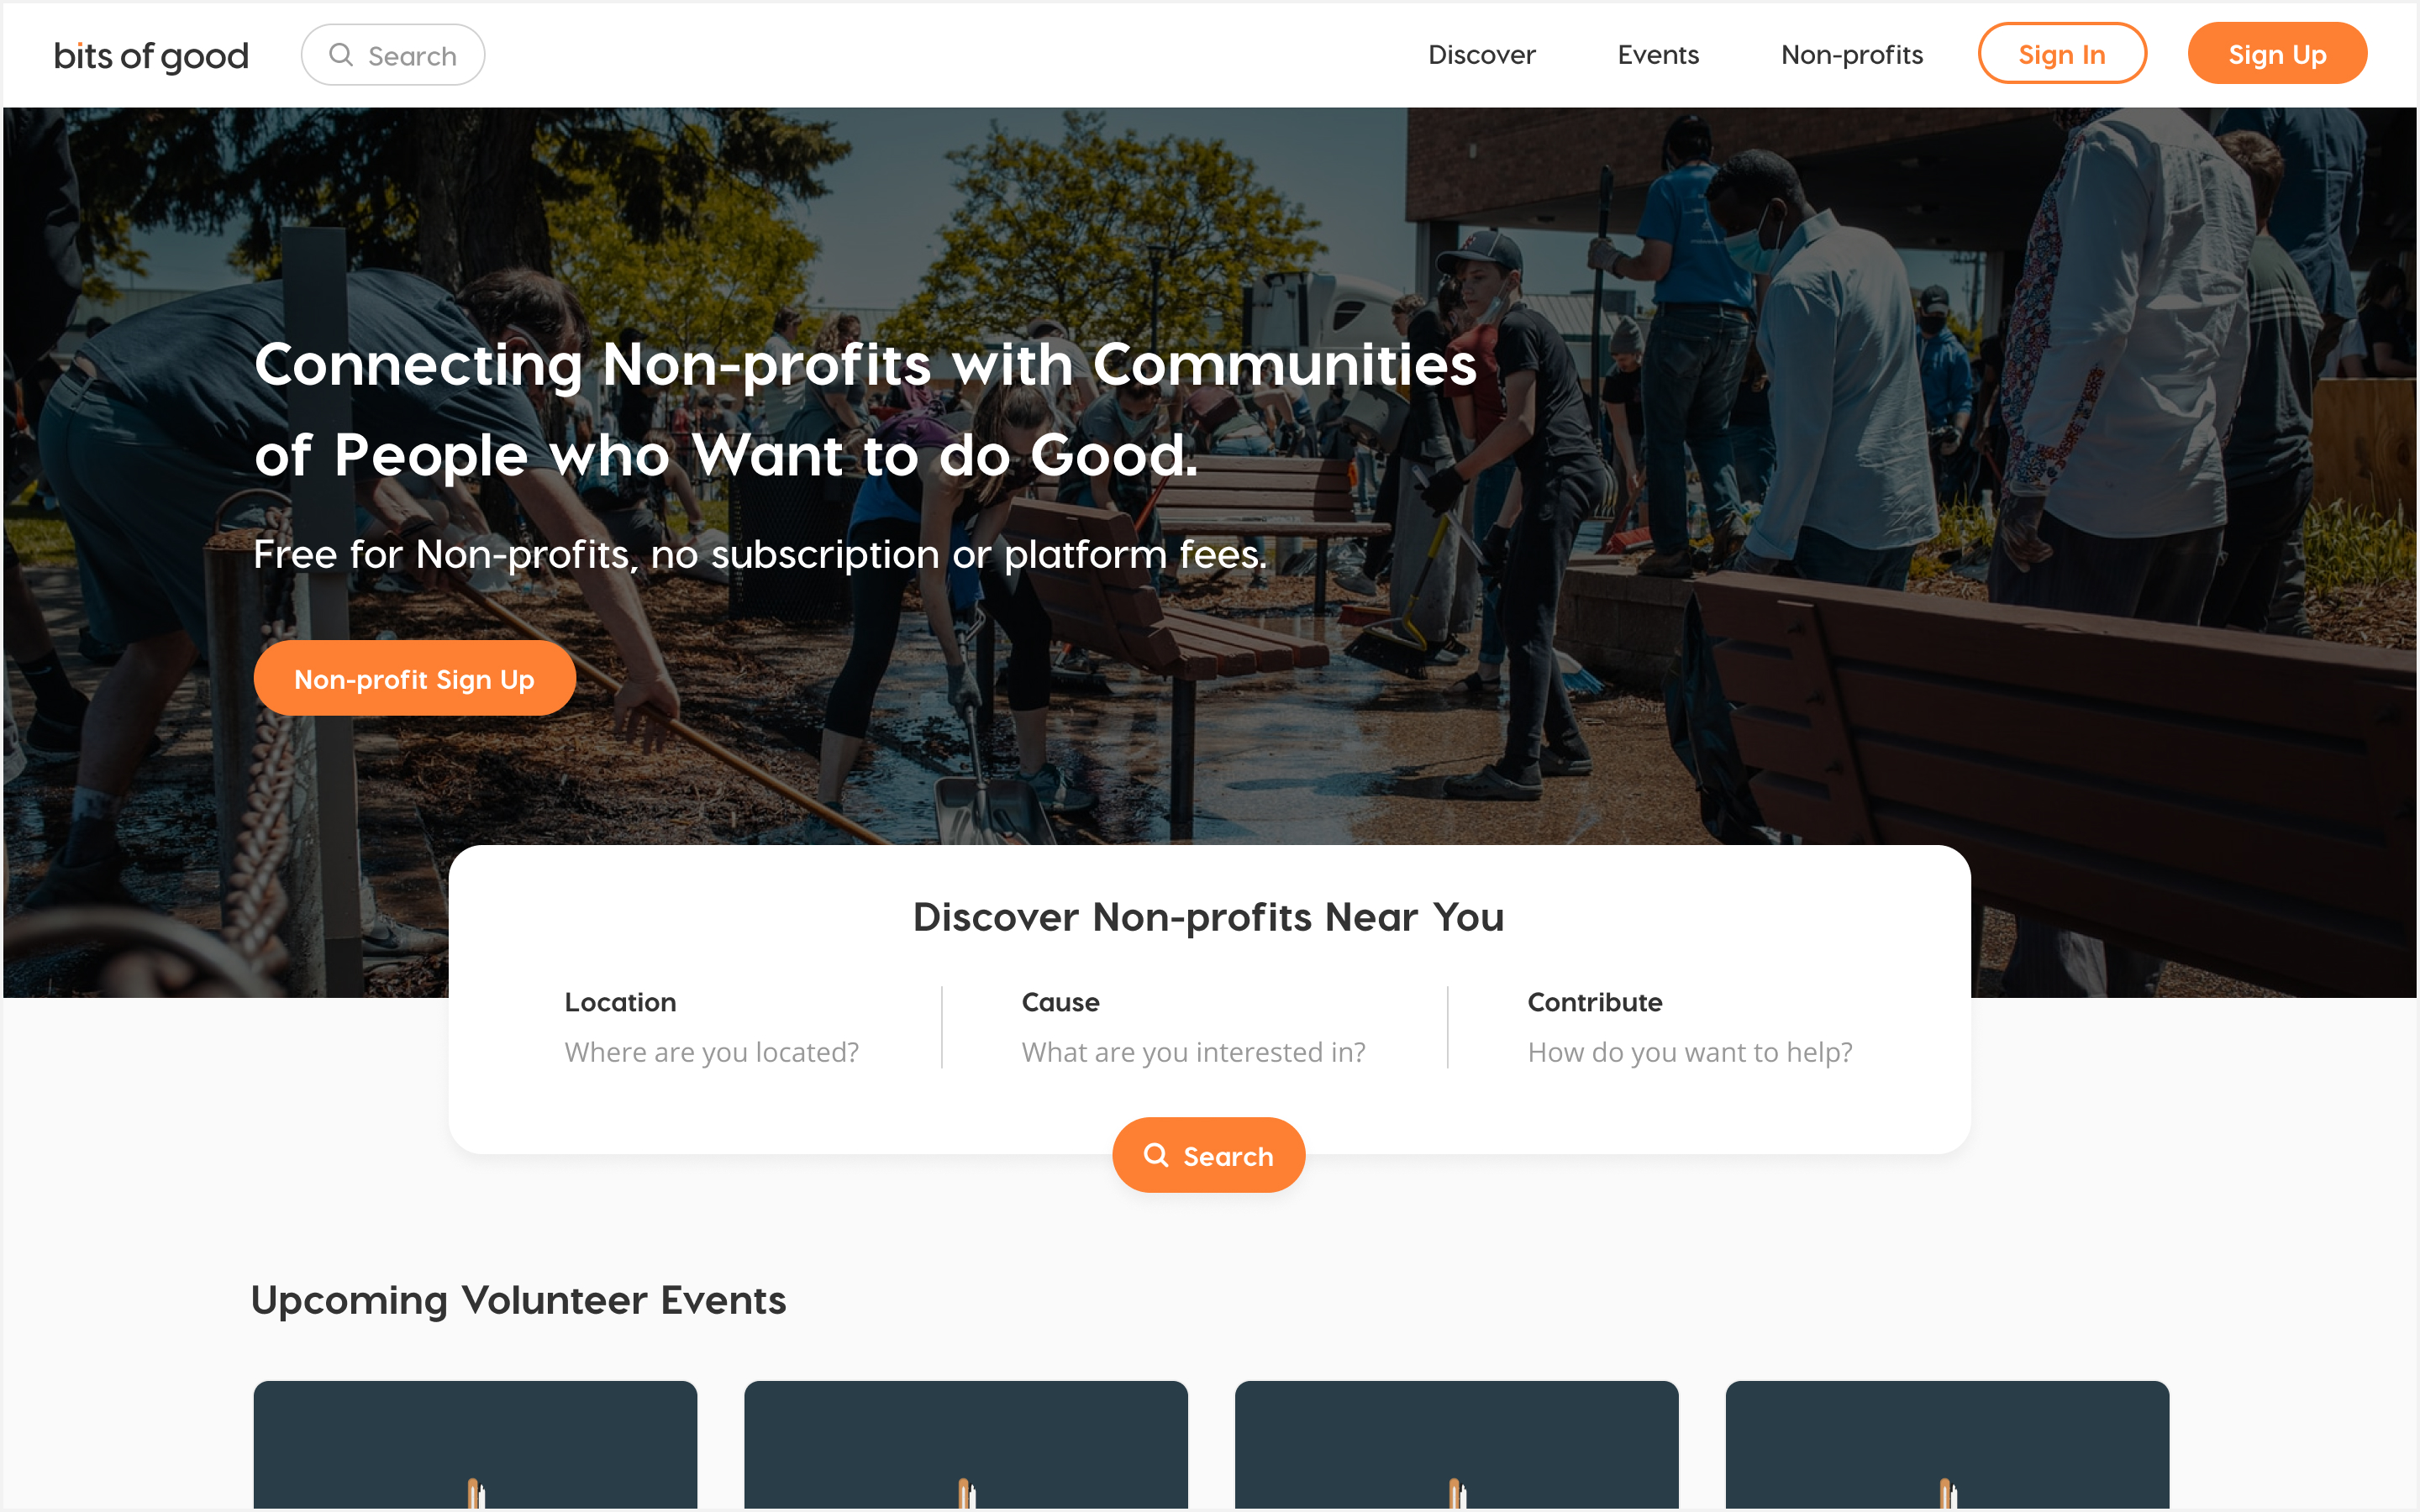 Landing page for the Bits of Good platform. Features a hero banner of volunteers, a search feature to discover non-profits, and upcoming volunteer events.